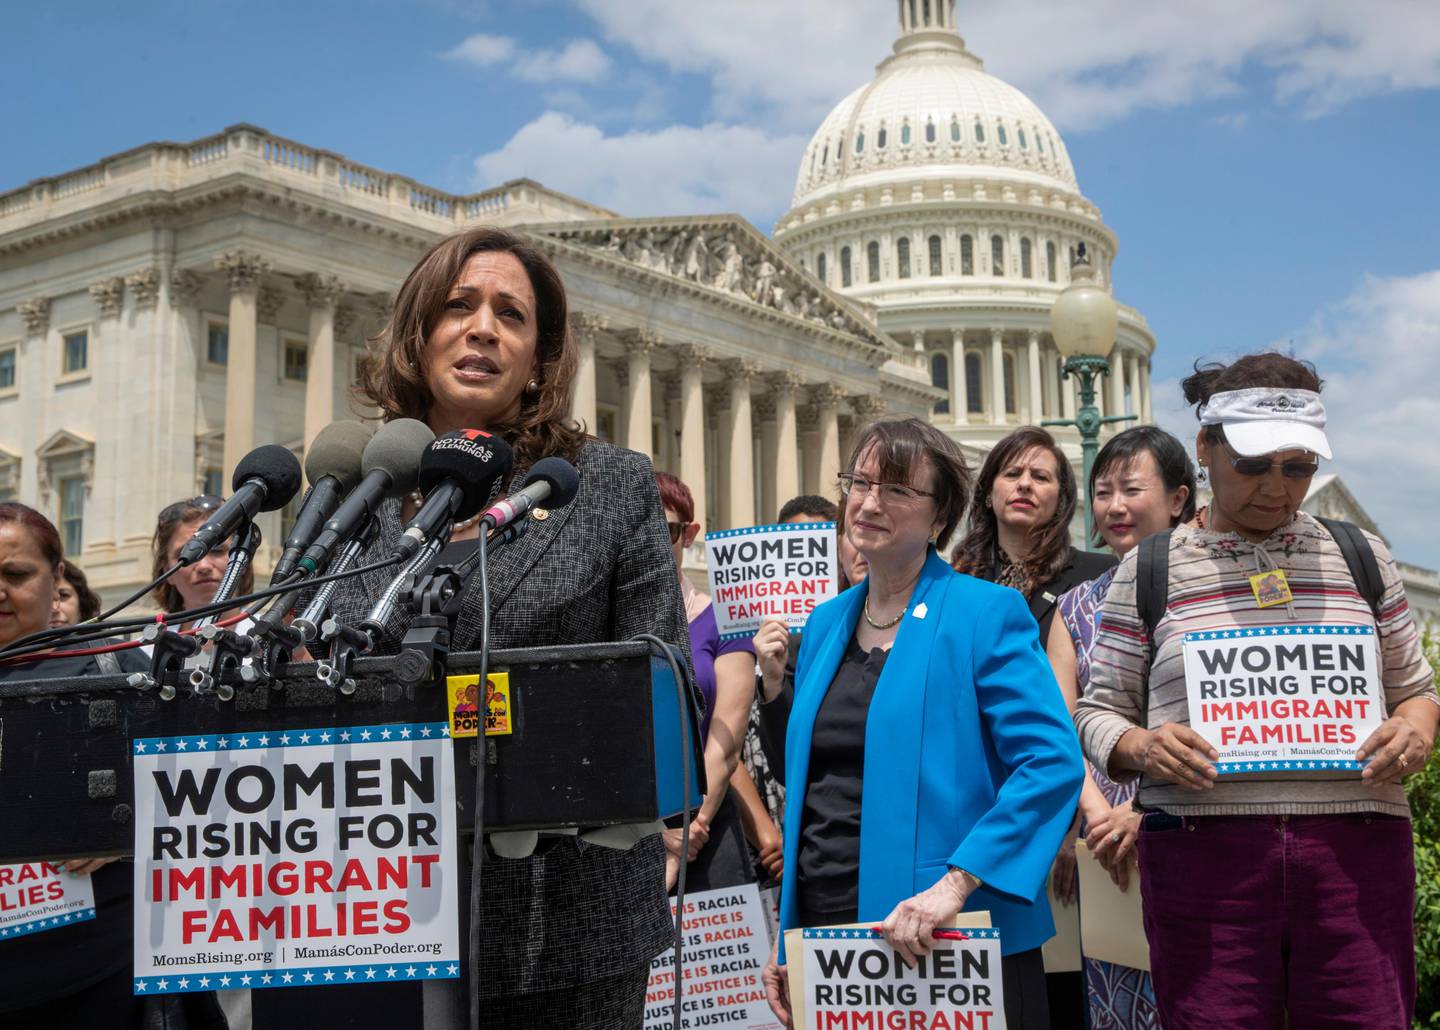 Sen. Kamala Harris, D-Calif., joins an women's advocacy group, MomsRising, to protest against threats by President Donald Trump against Central American asylum-seekers to separate children from their parents along the southwest border to deter migrants from crossing into the United States, at the Capitol in Washington, Wednesday, May 23, 2018. (AP Photo/J. Scott Applewhite)